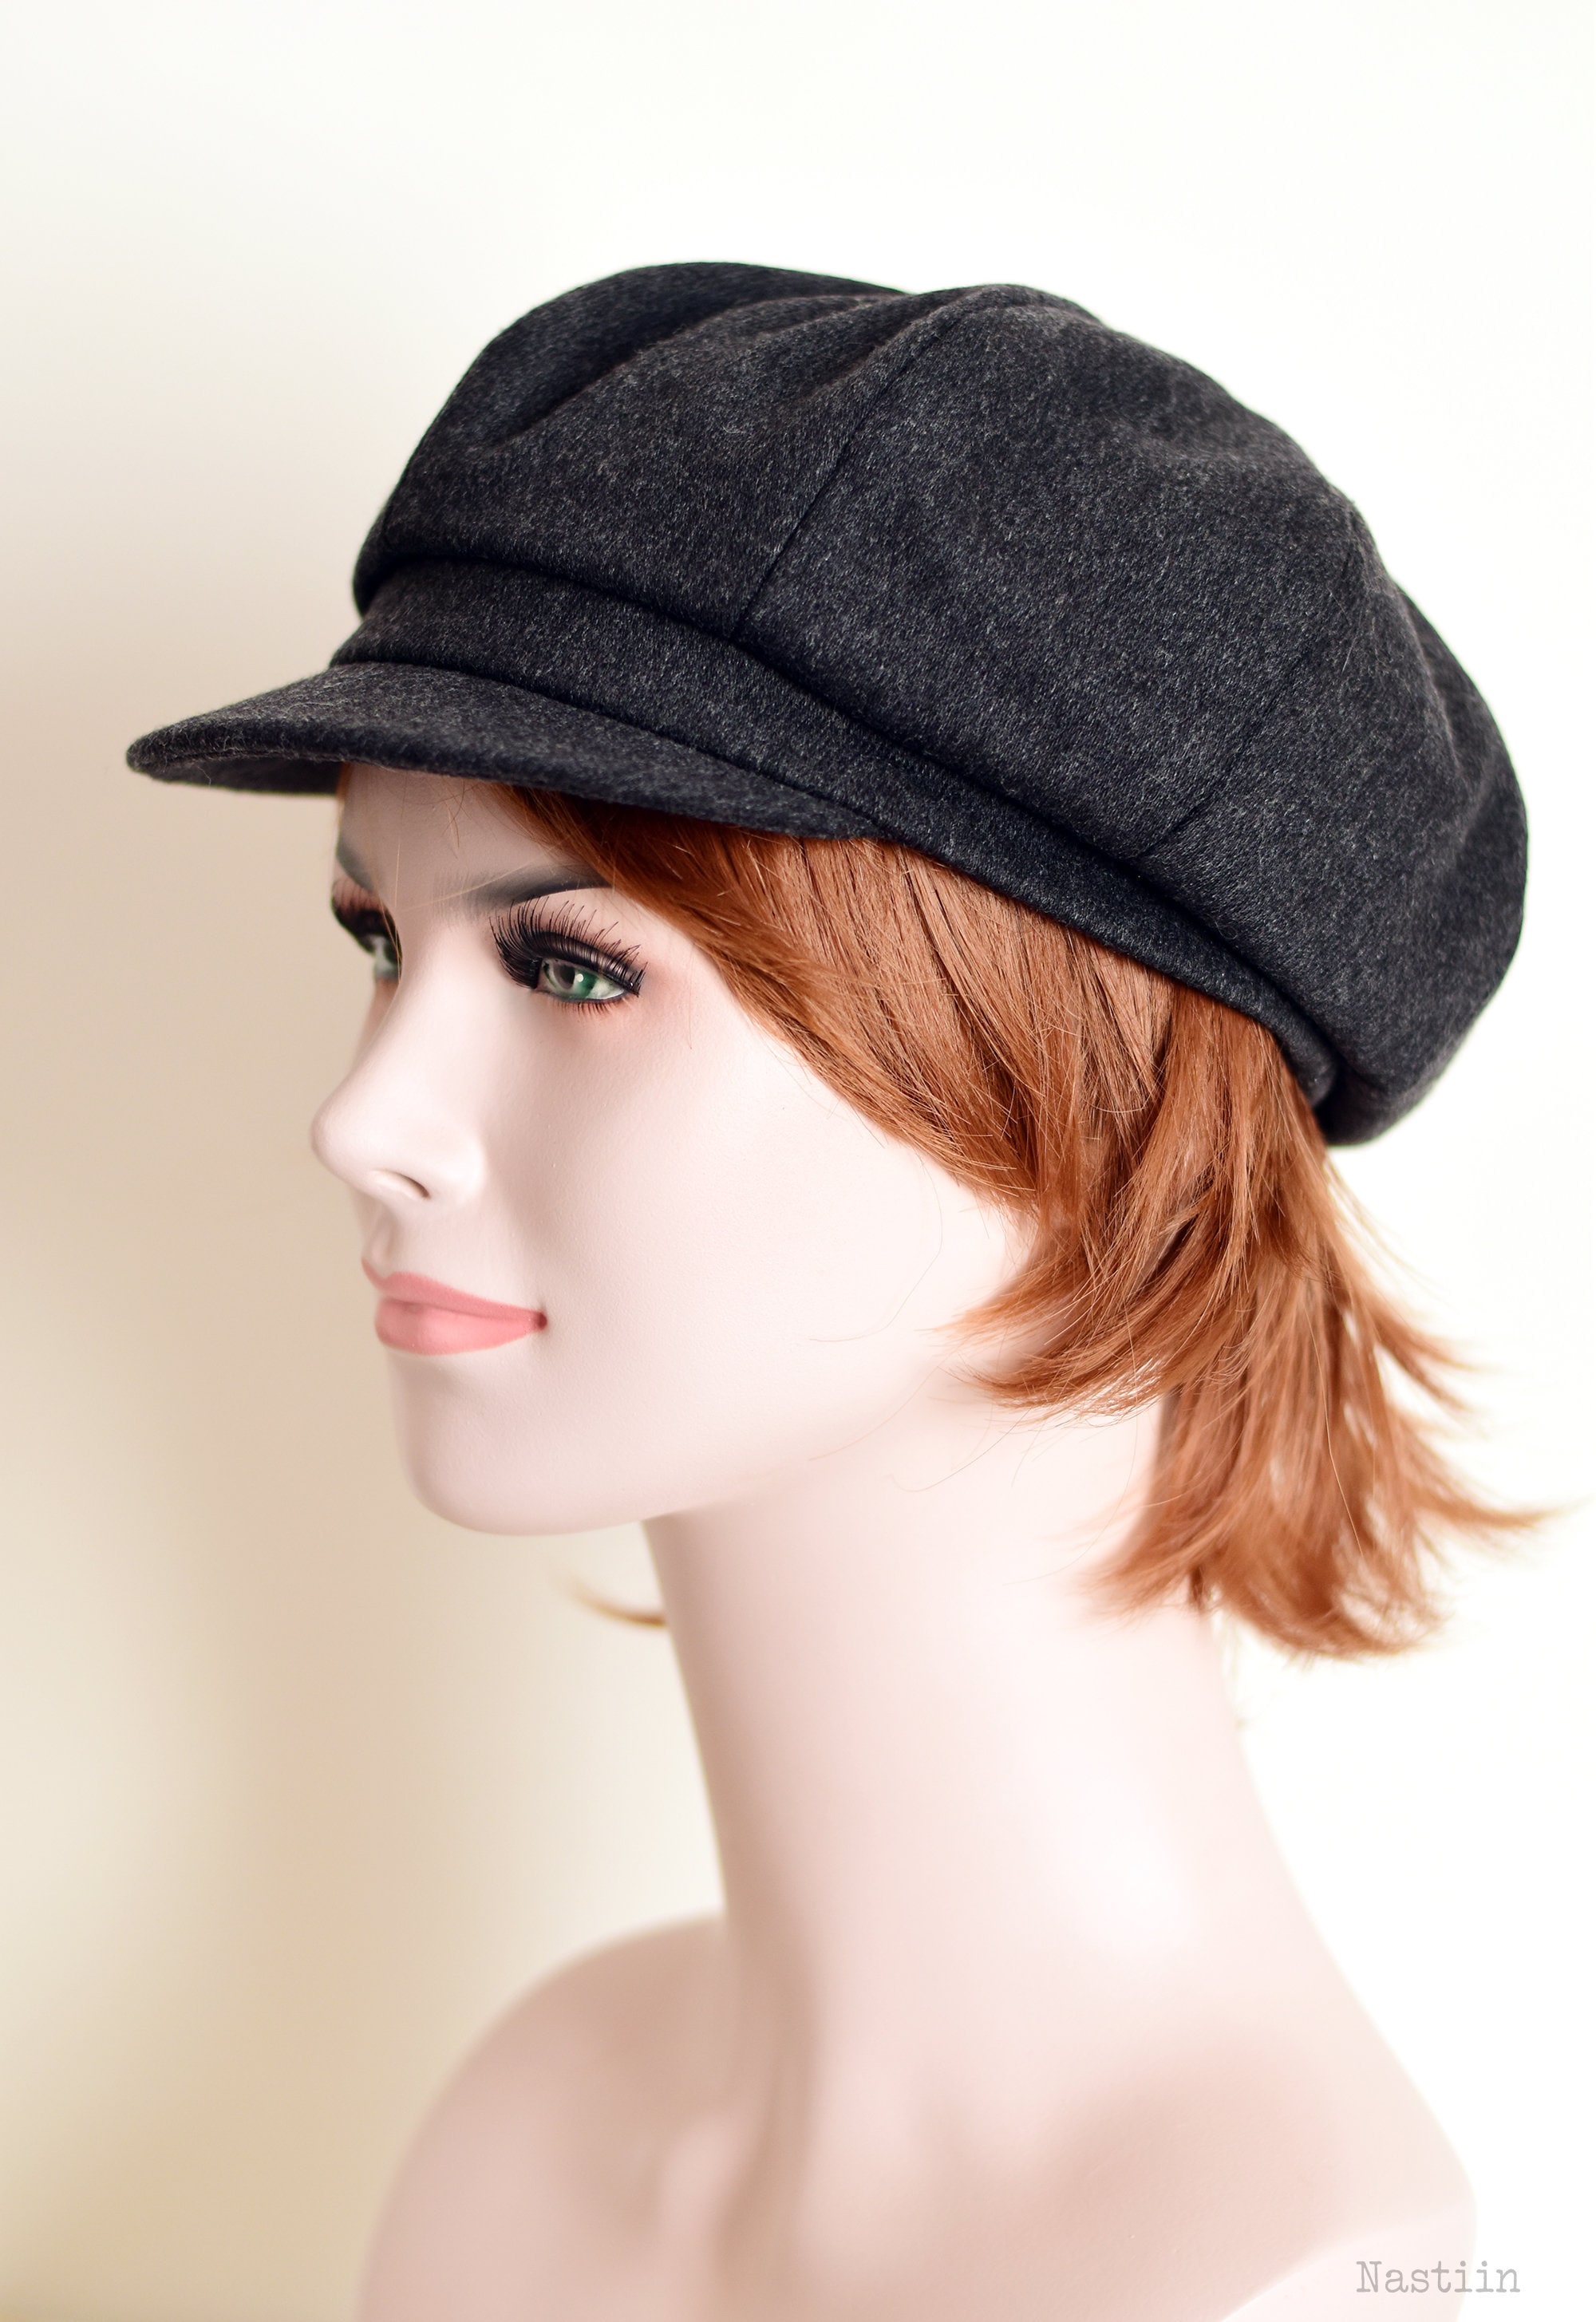 Fitted Newsboy Cap In Charcoal Grey Stylish Dark Gray News Etsy